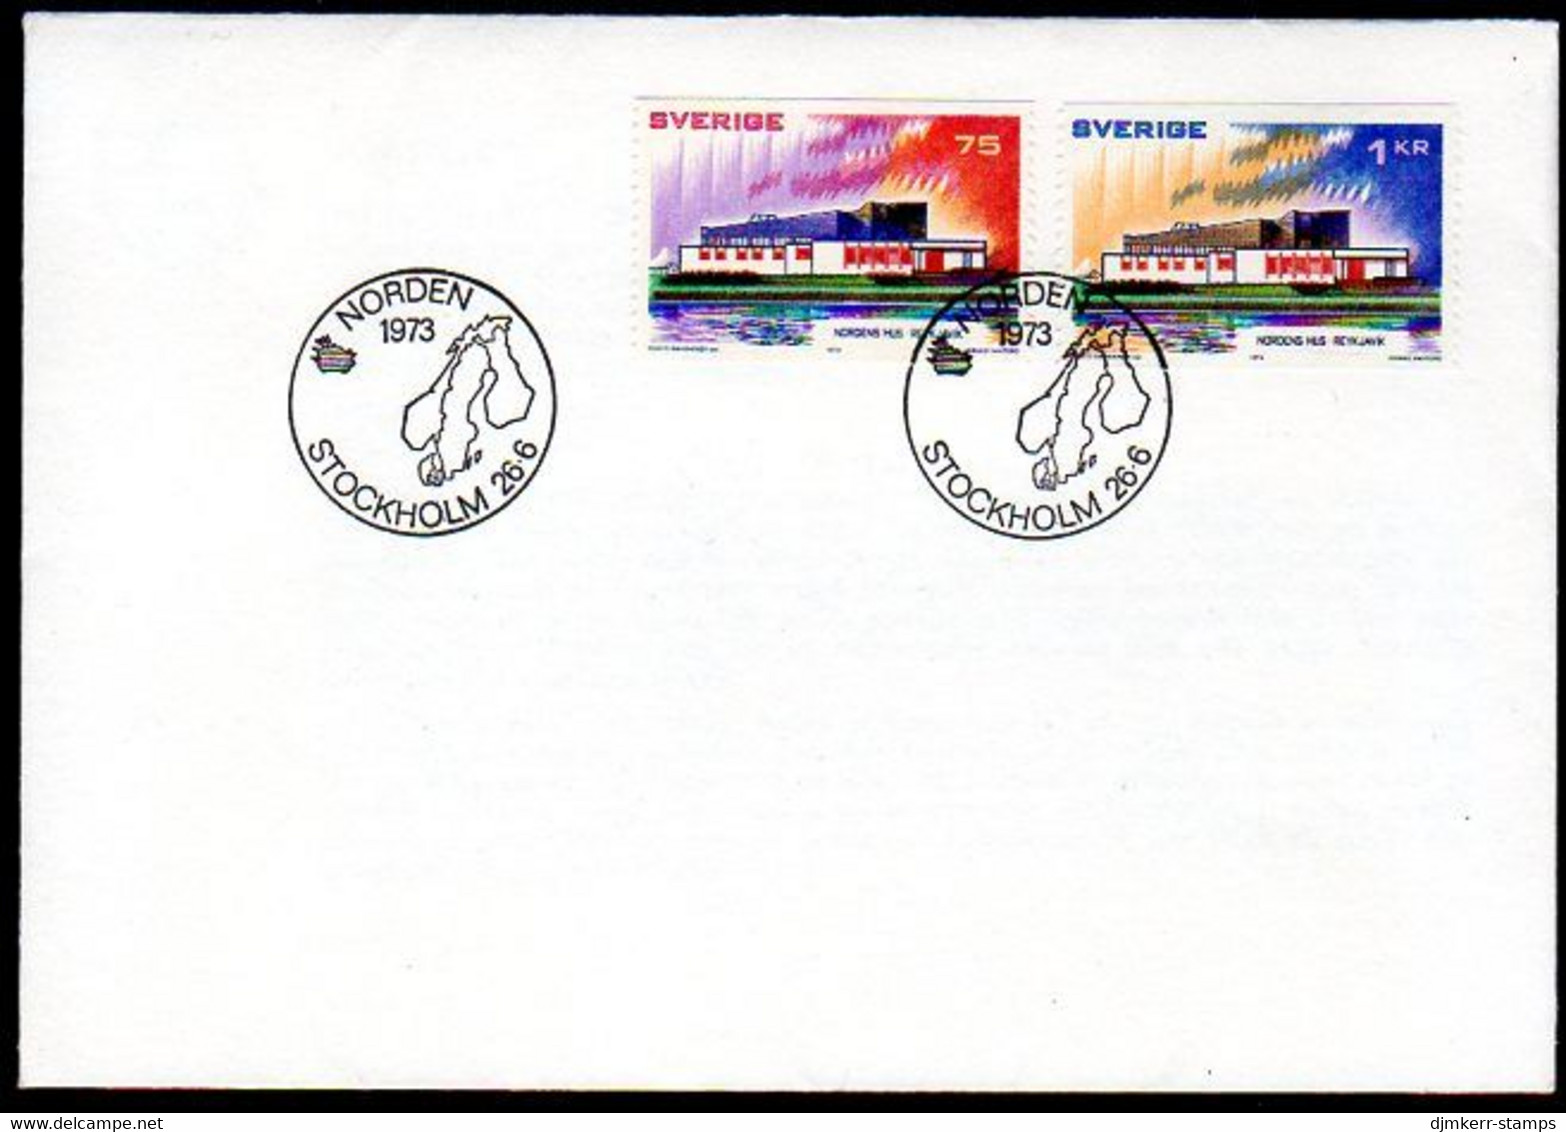 SWEDEN 1973 Nordic House FDC.  Michel 808-09 - FDC